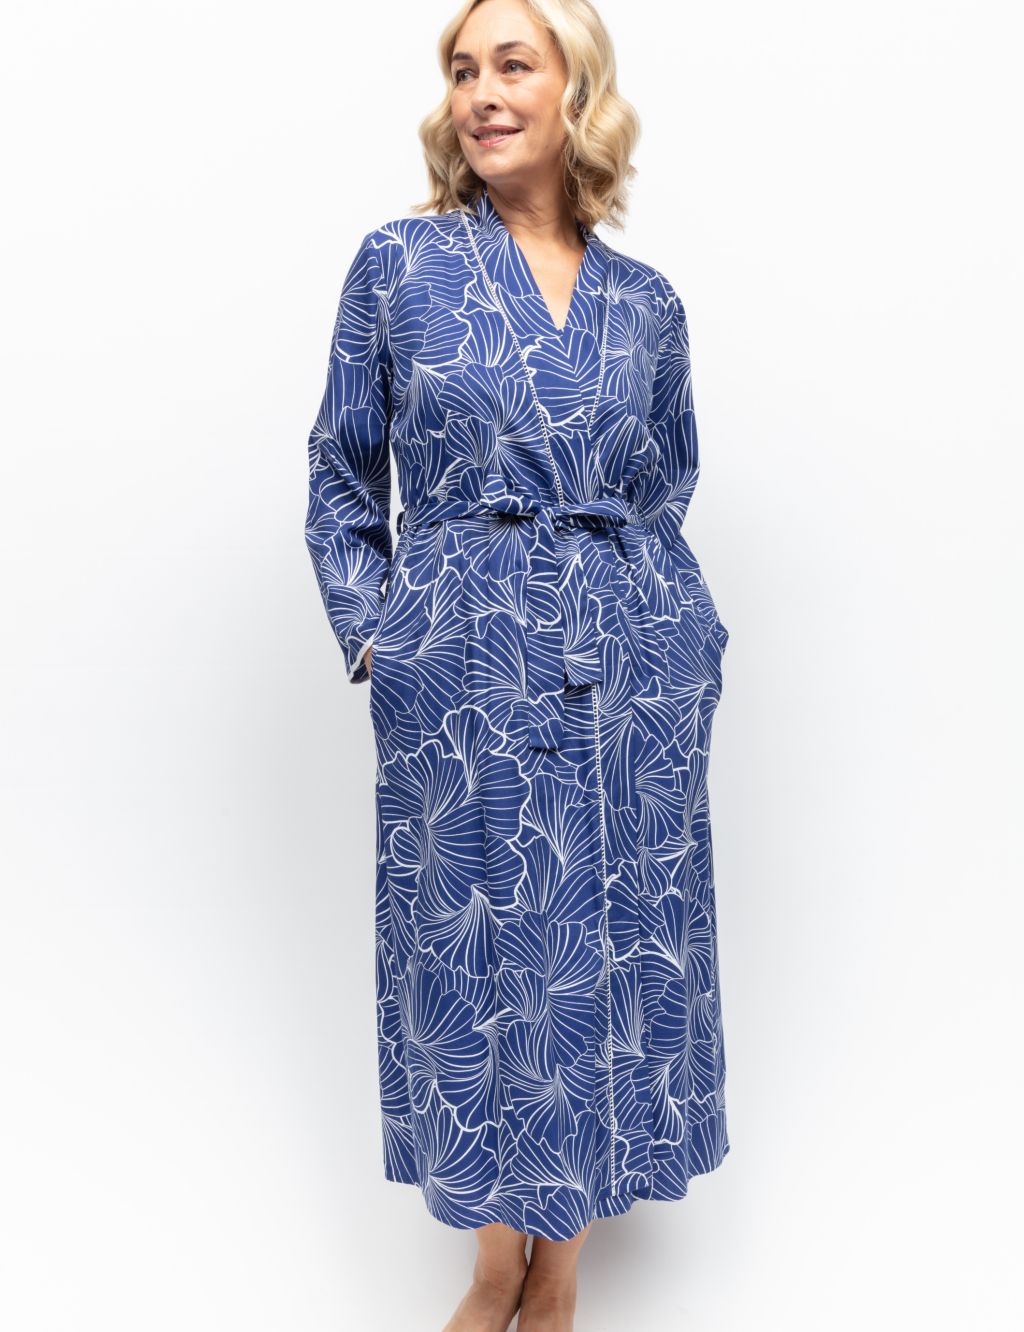 Cotton Modal Shell Print Dressing Gown image 1